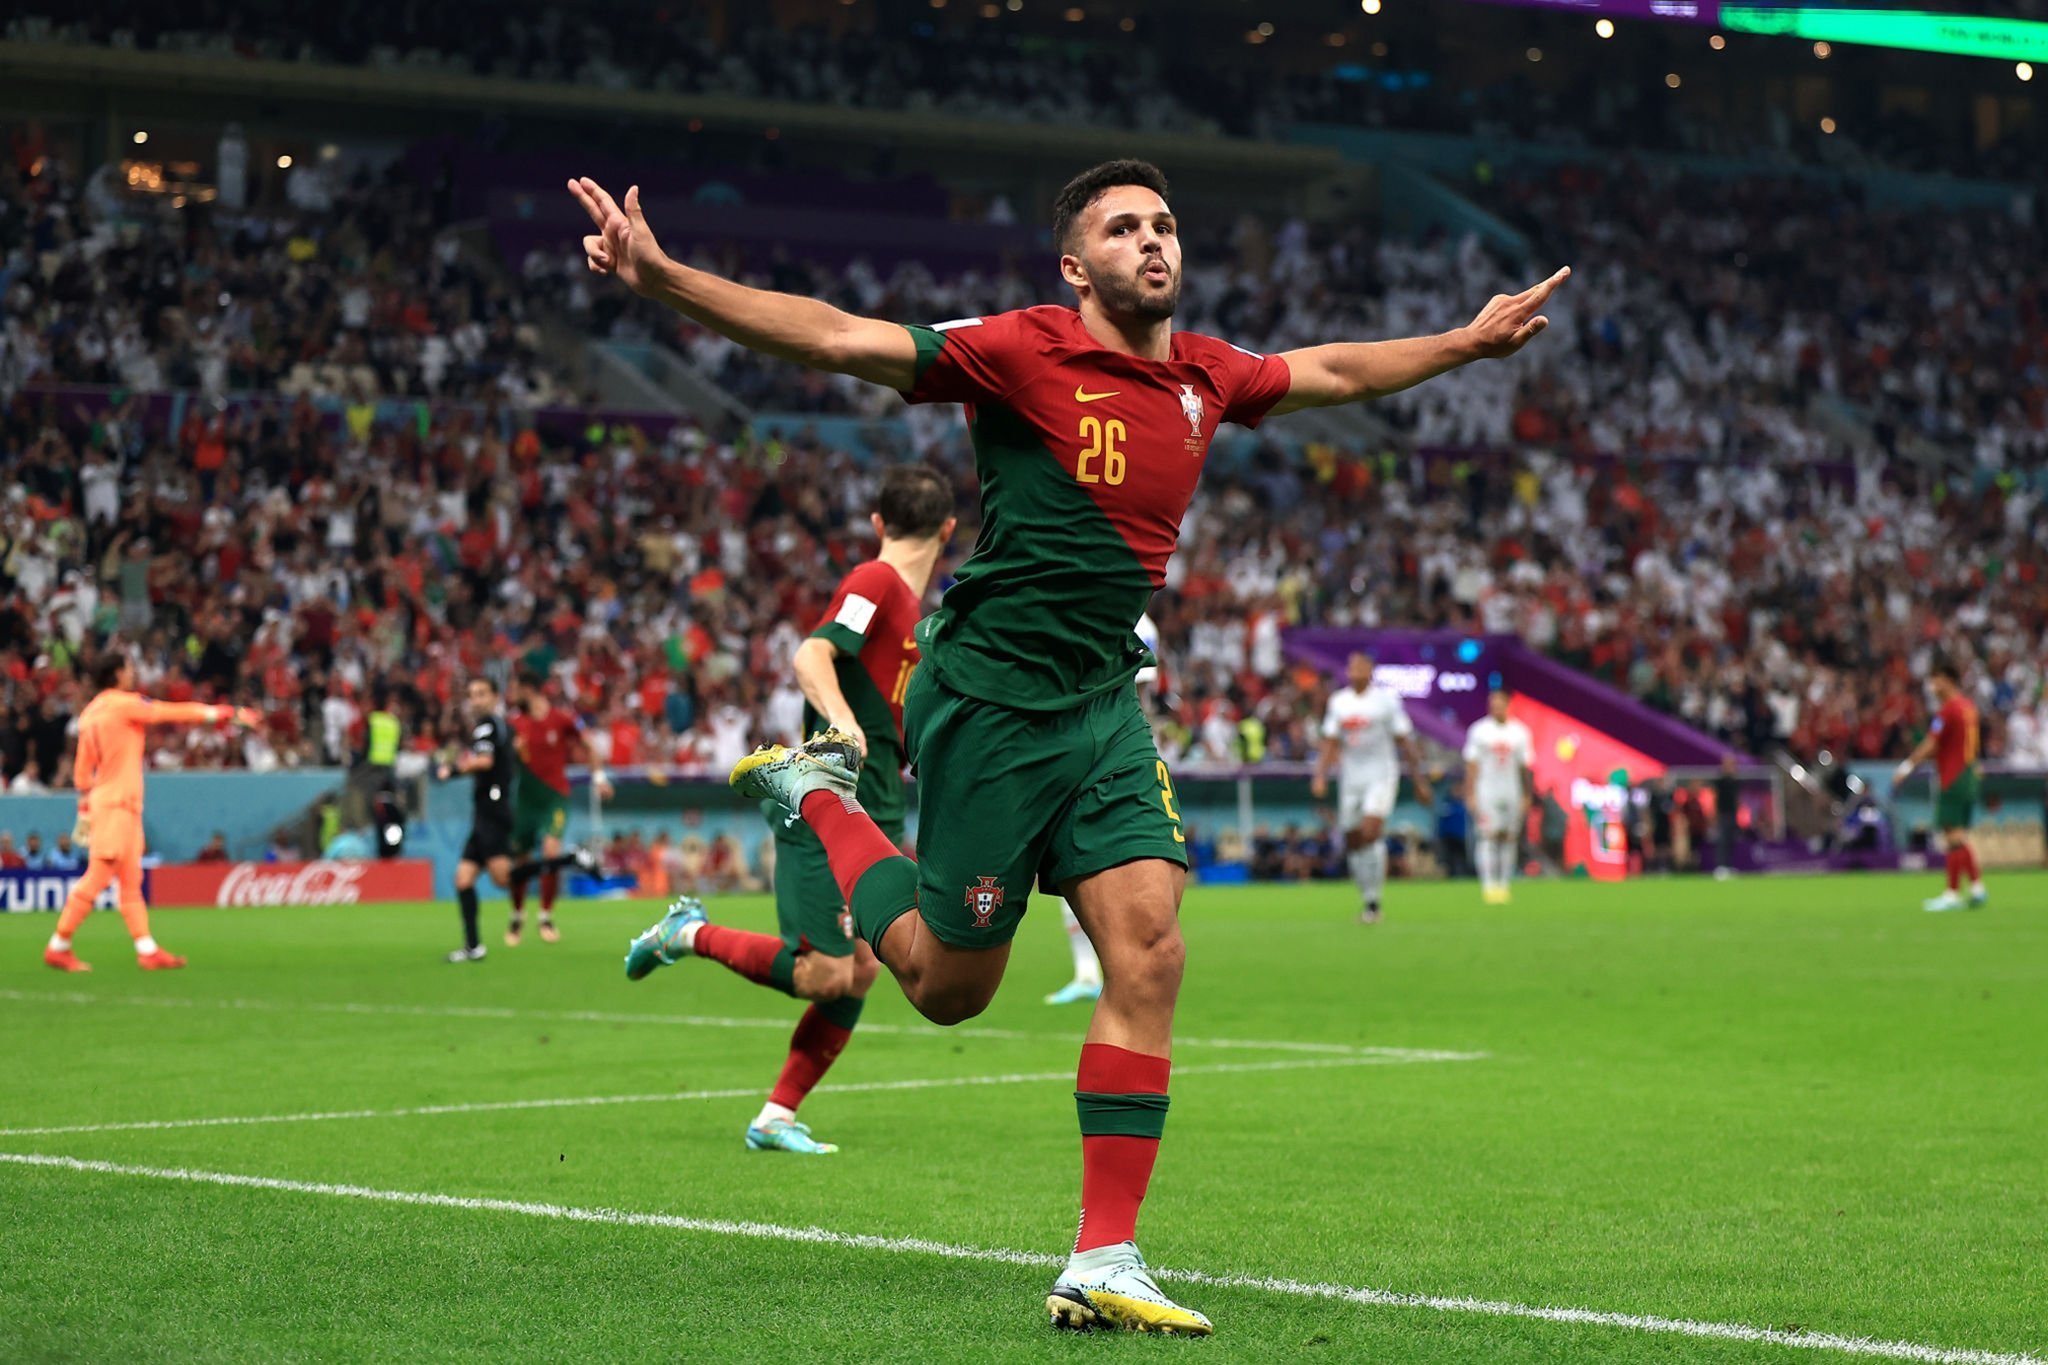 Portugal vs Switzerland HIGHLIGHTS: Goncalo Ramos HATTRICK Steers Portugal to Last 8, Portugal hits HALF DOZEN of goals against Switzerland - Watch Portugal vs Switzerland HIGHLIGHTS